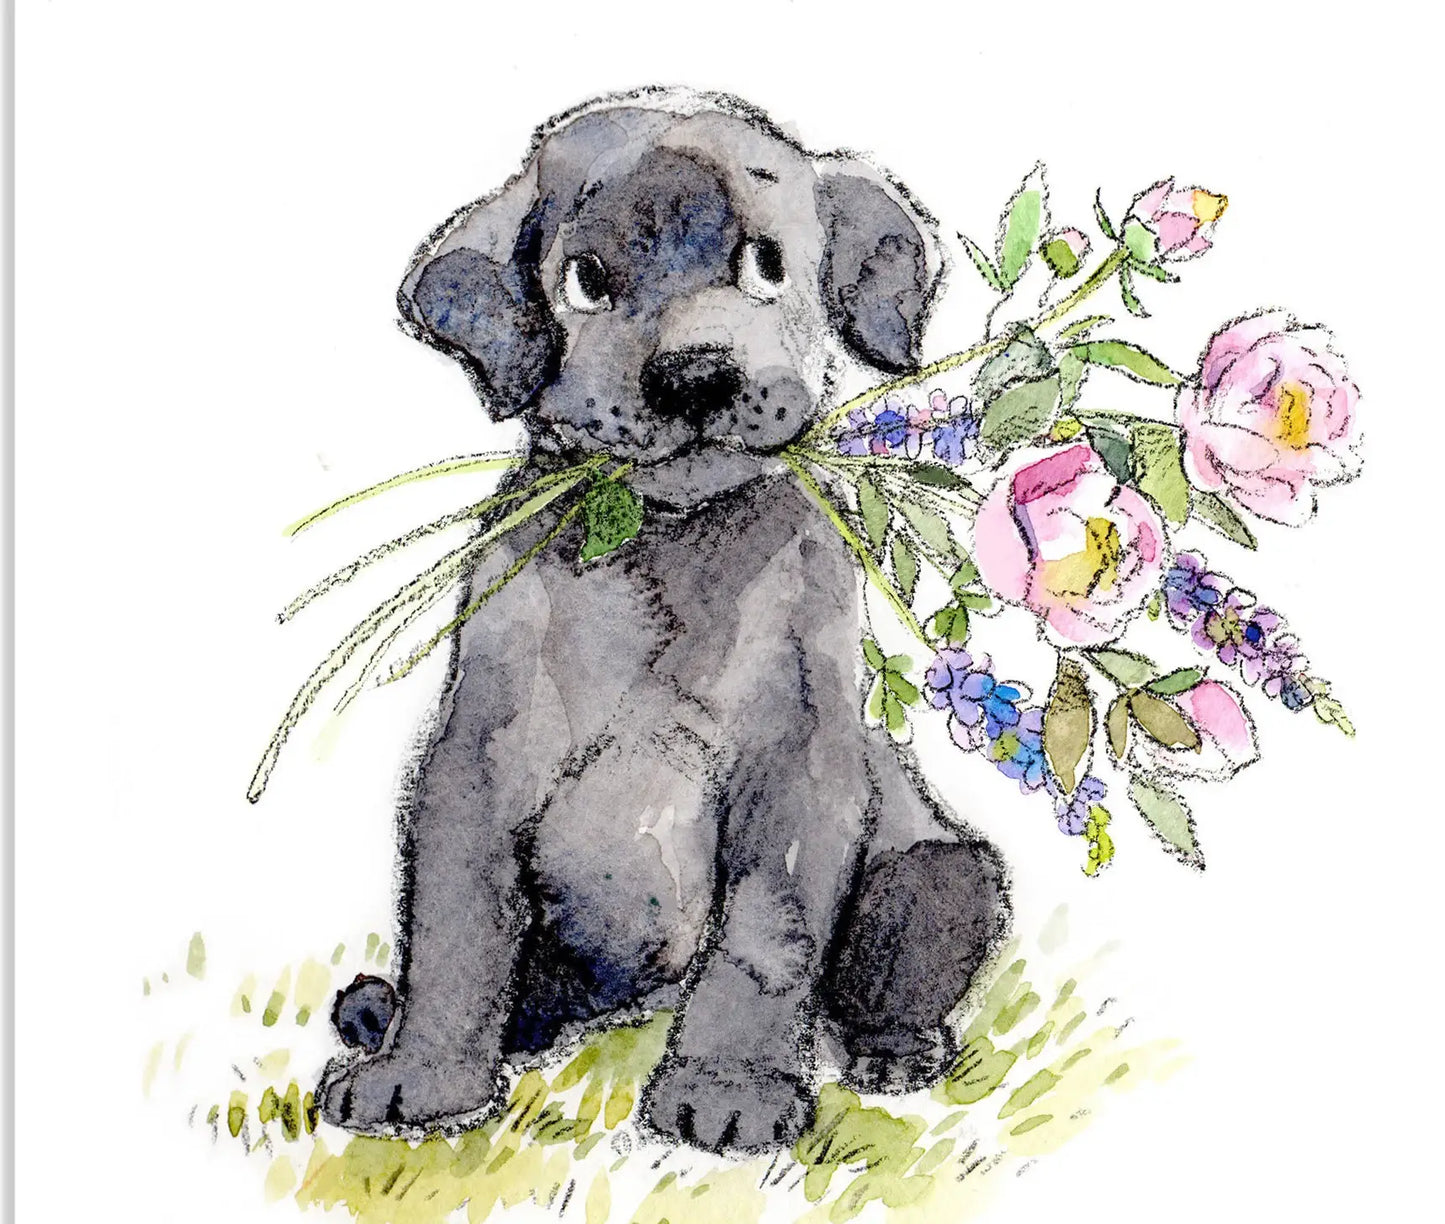 Paper Shed Design Ltd - Cute Dog Birthday Card - Black Labrador With Flowers